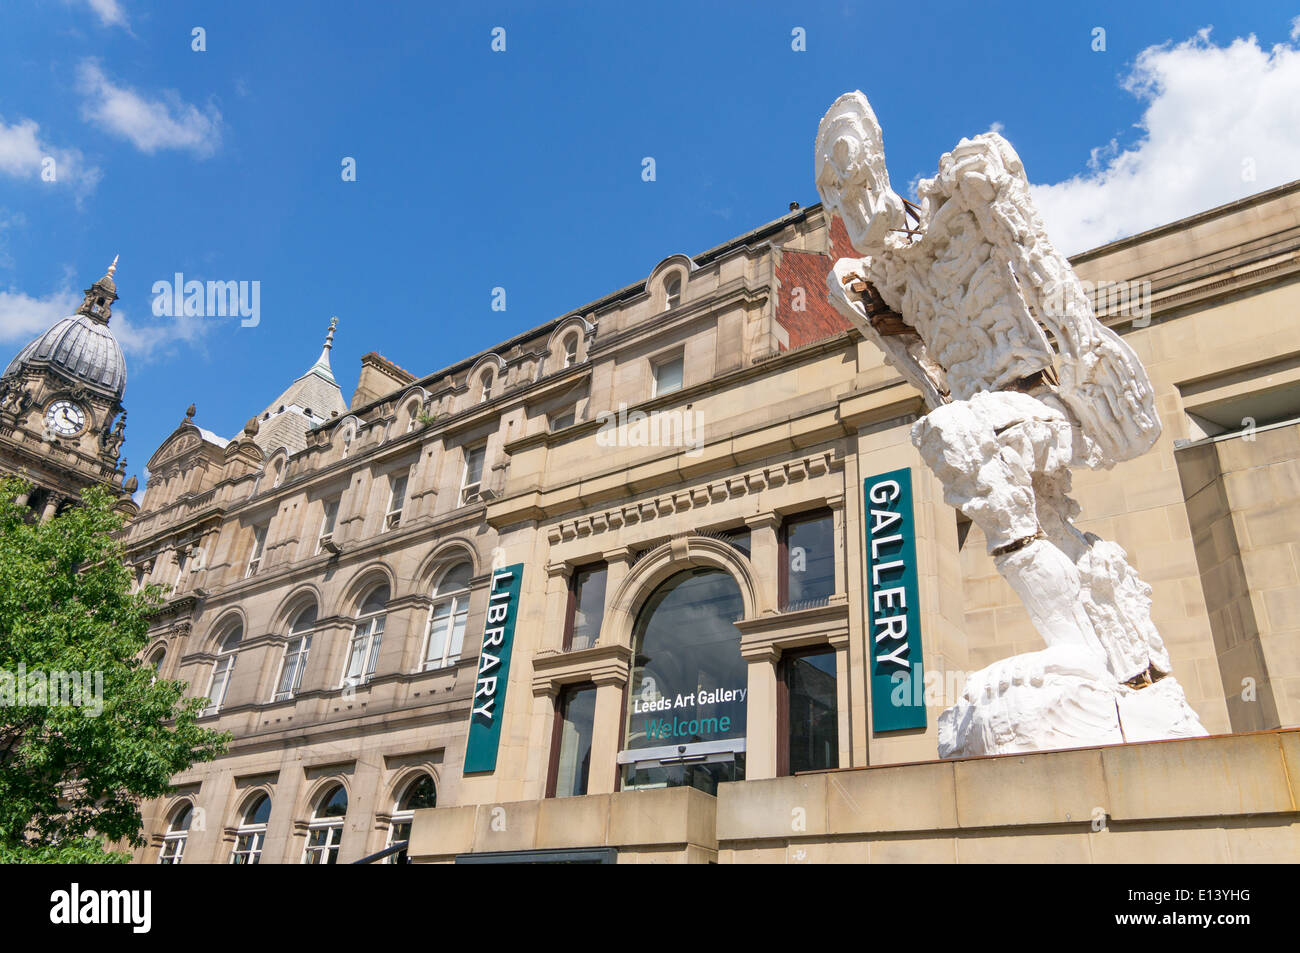 Leeds library and art Galley with sculpture by Thomas Houseago, Large Walking Figure, Yorkshire, England, UK Stock Photo